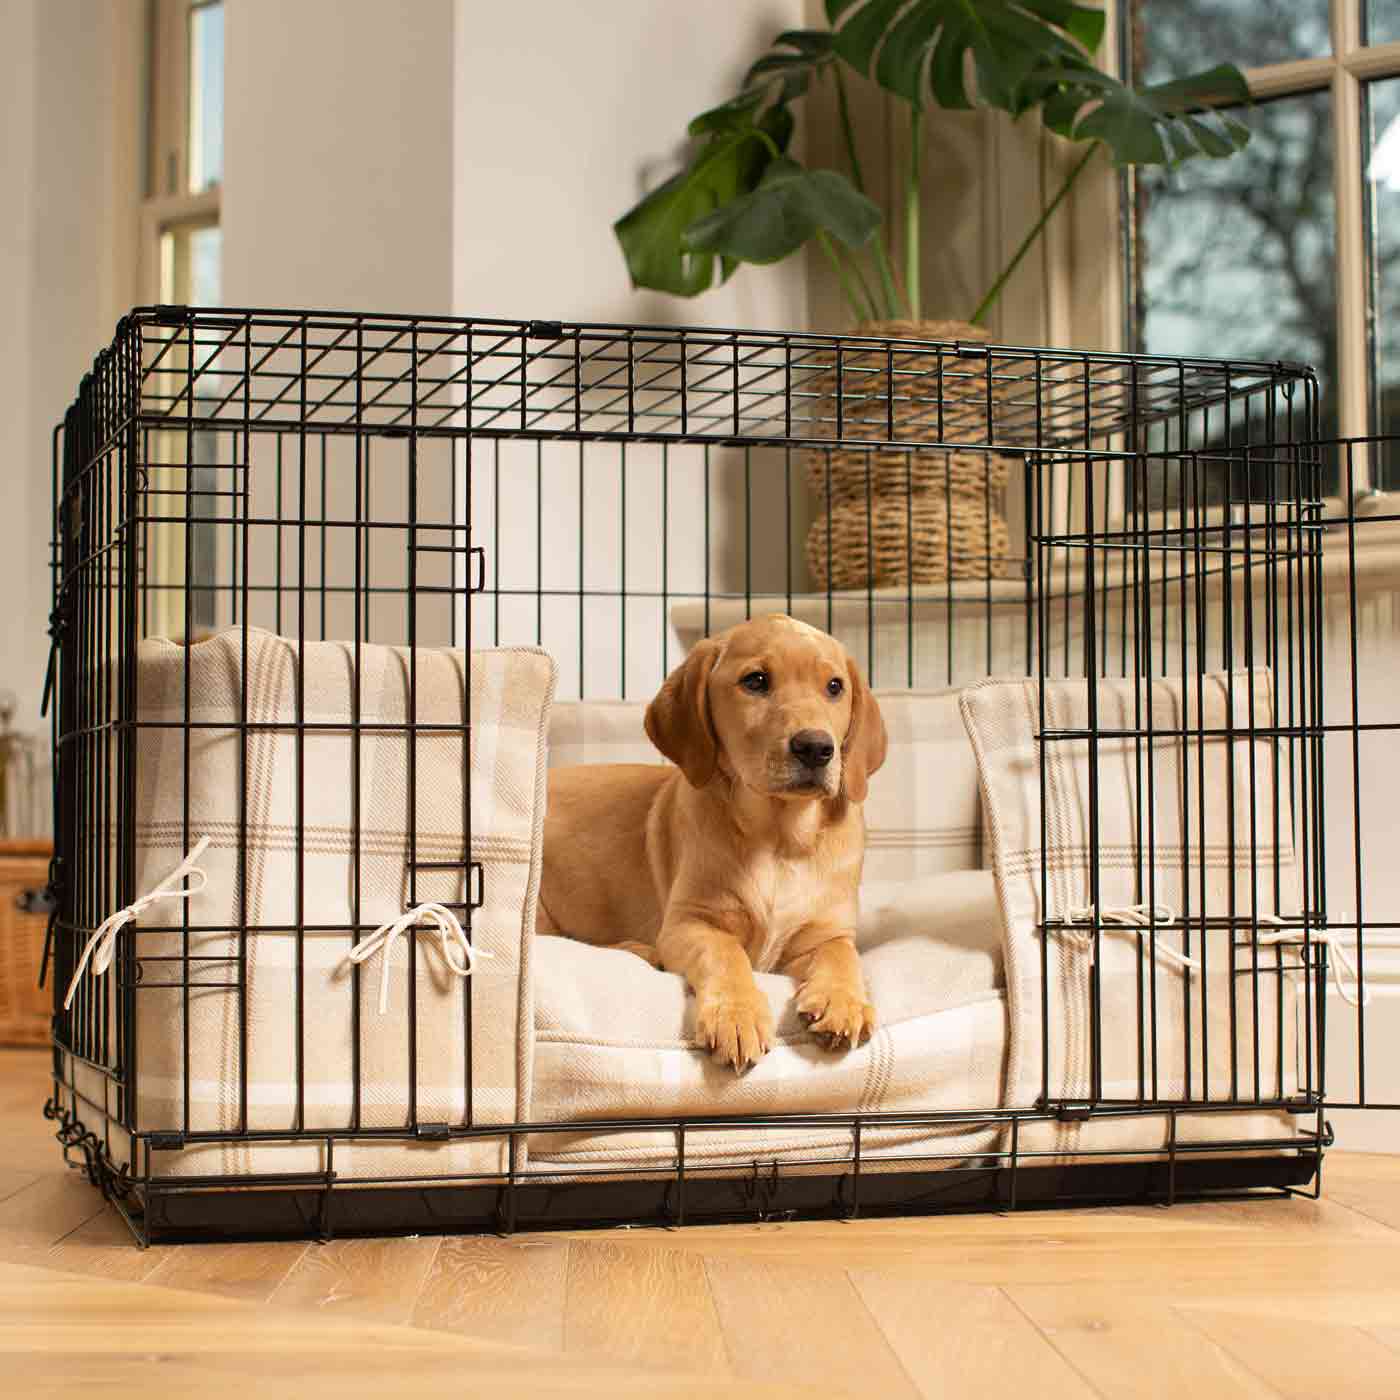 Luxury Dog Crate Bumper, Balmoral Natural Tweed Crate Bumper Cover The Perfect Dog Crate Accessory, Available To Personalise Now at Lords & Labradors